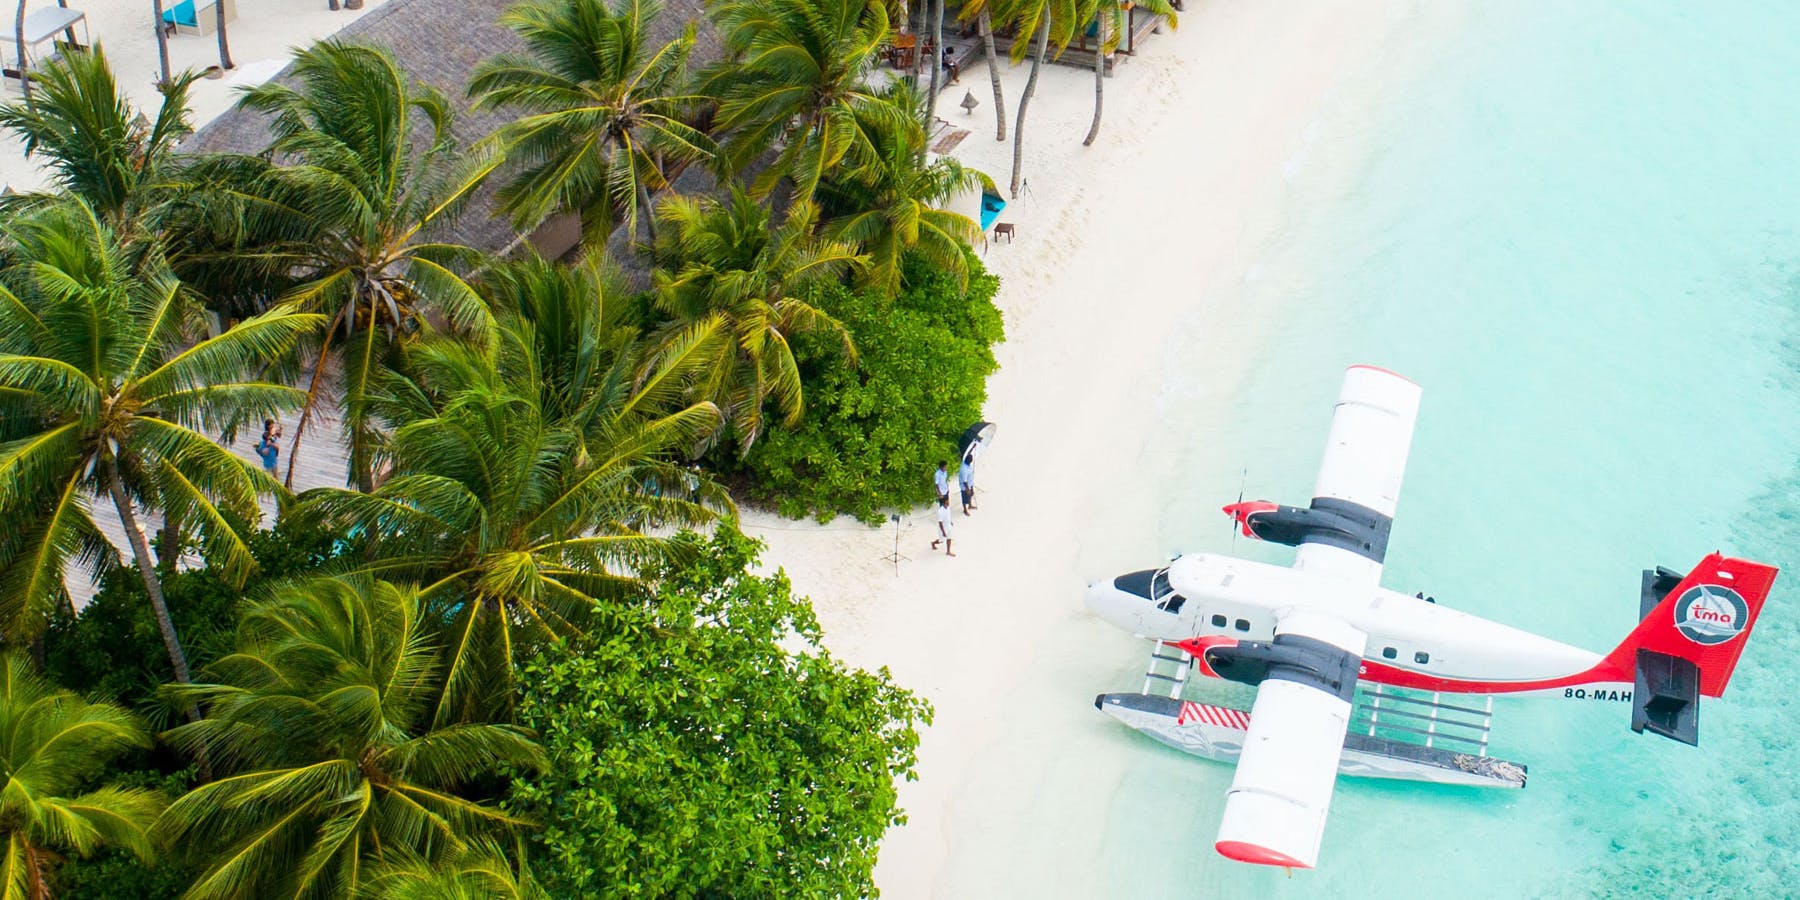 Arrive by plane to the Maldives